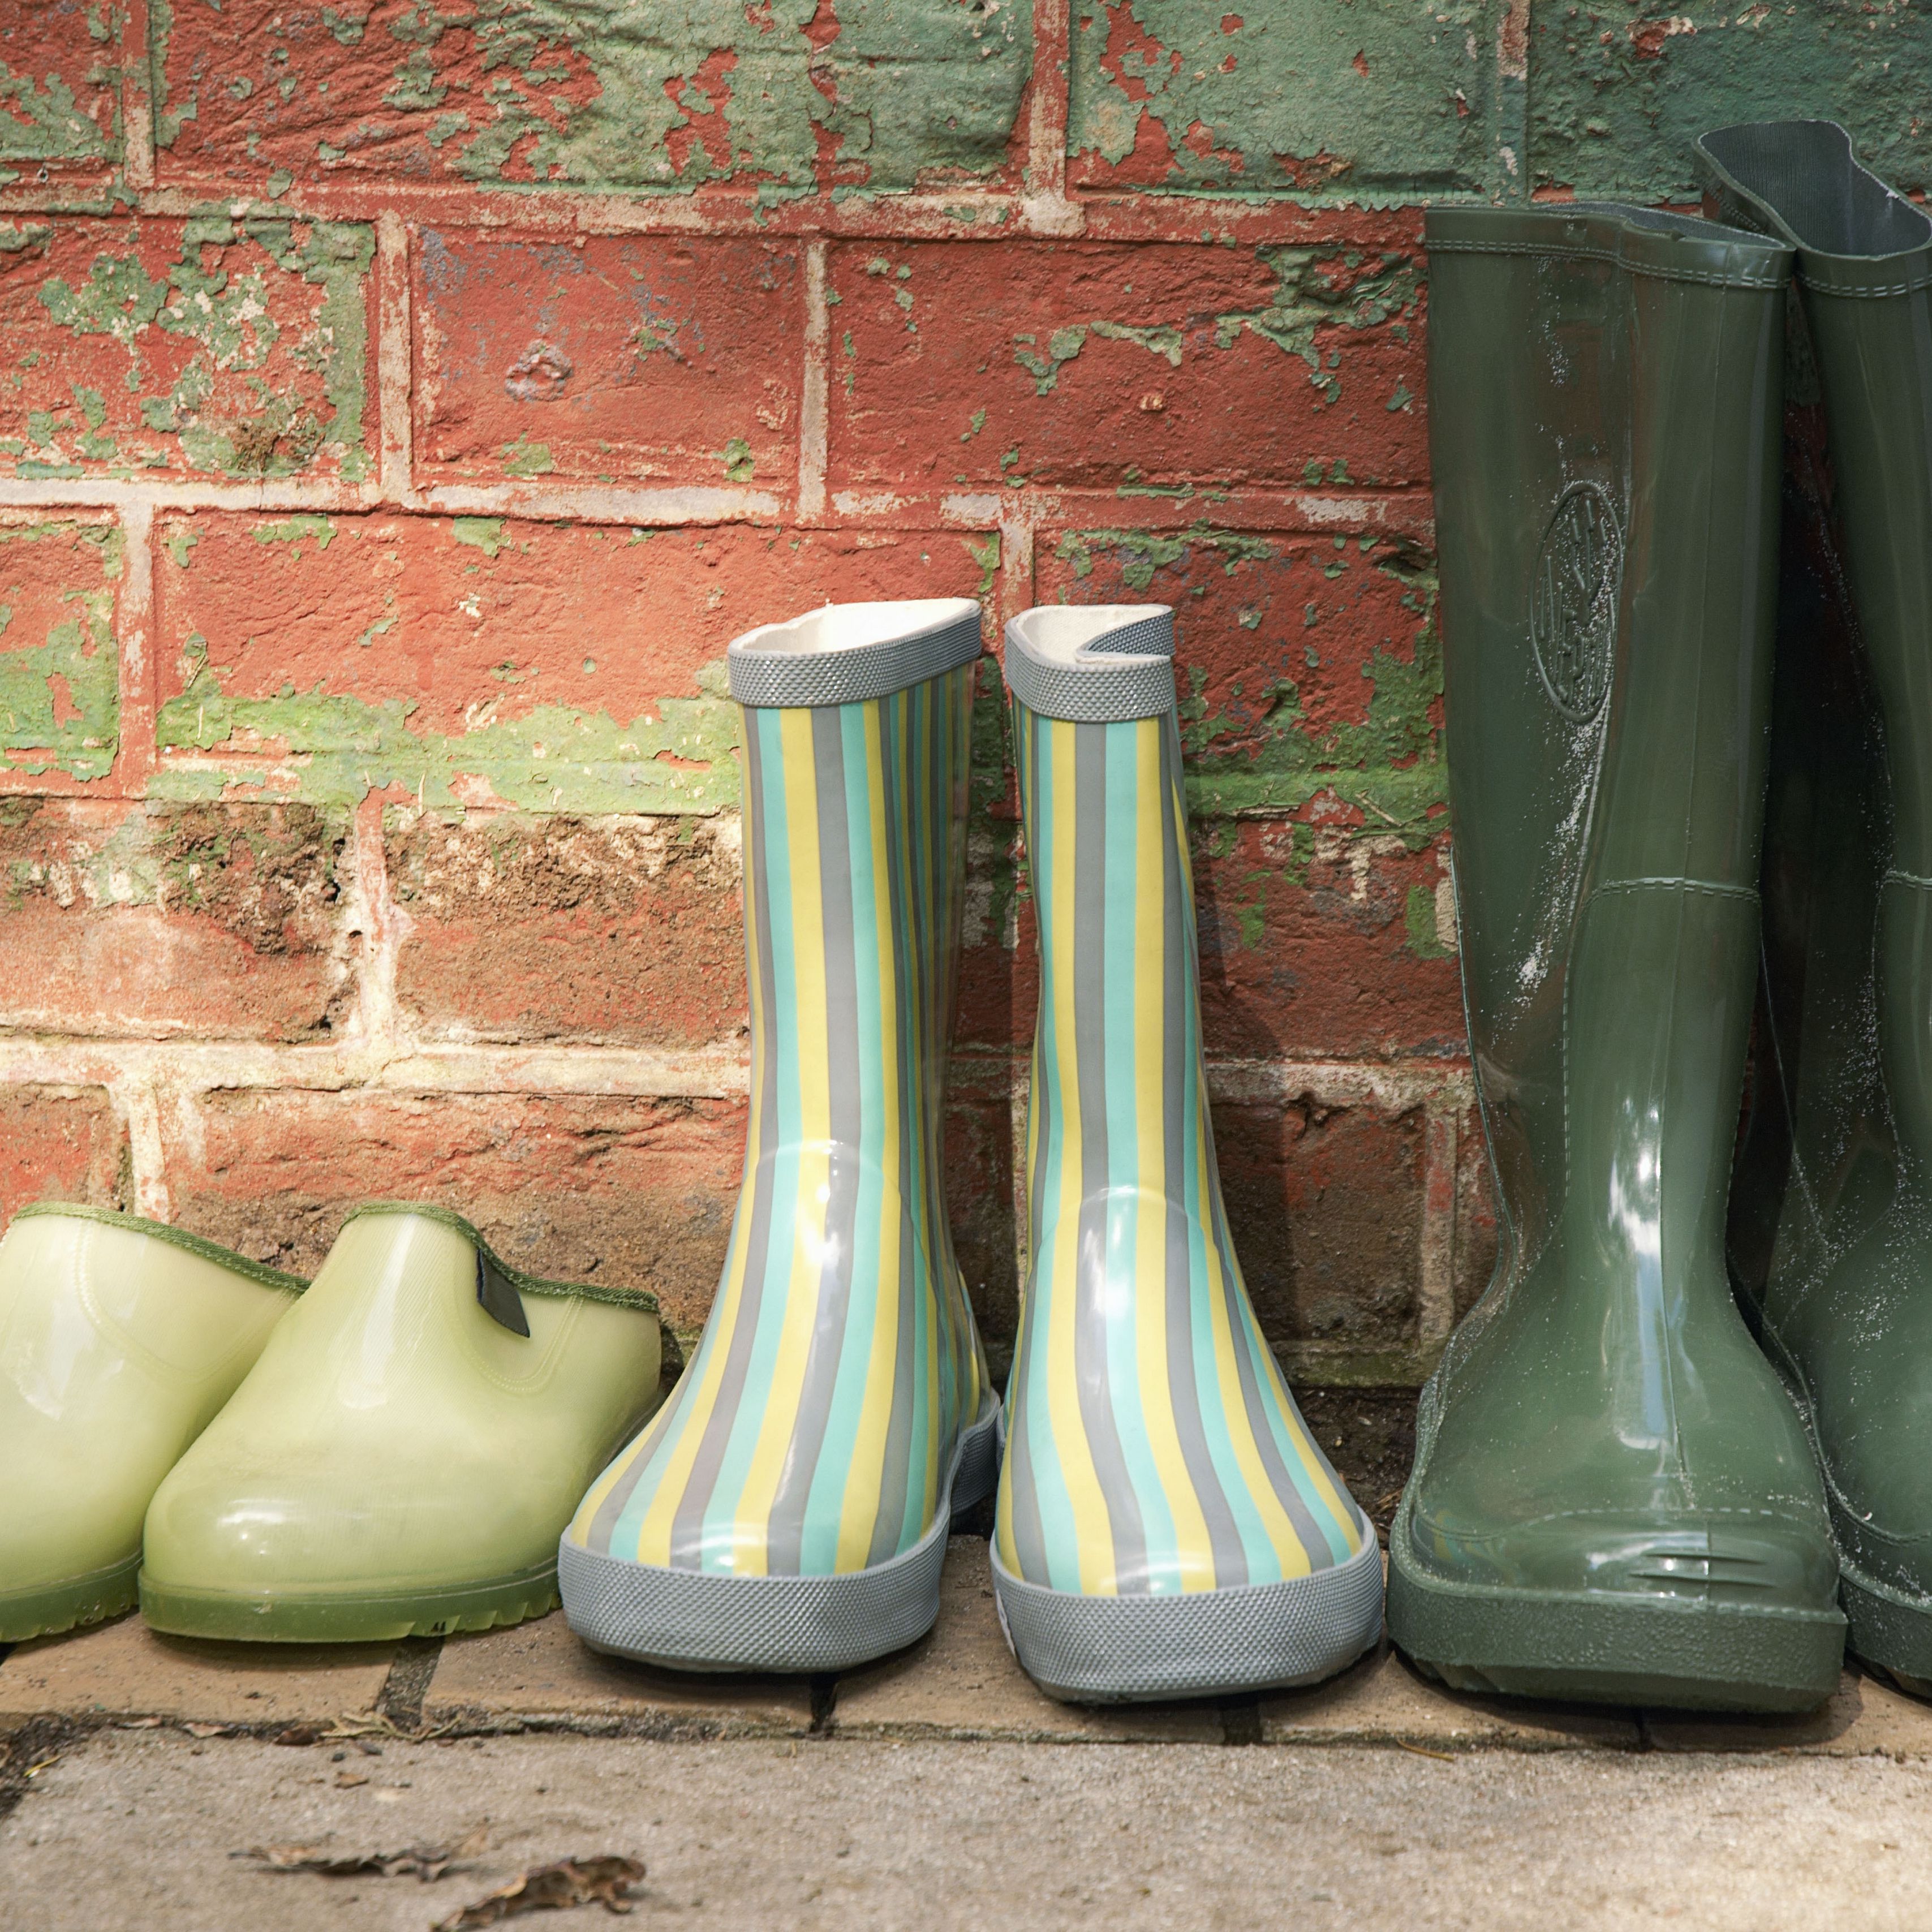 Download wallpaper 3415x3415 galoshes, boots, shoes, rubber ipad pro 12 ...